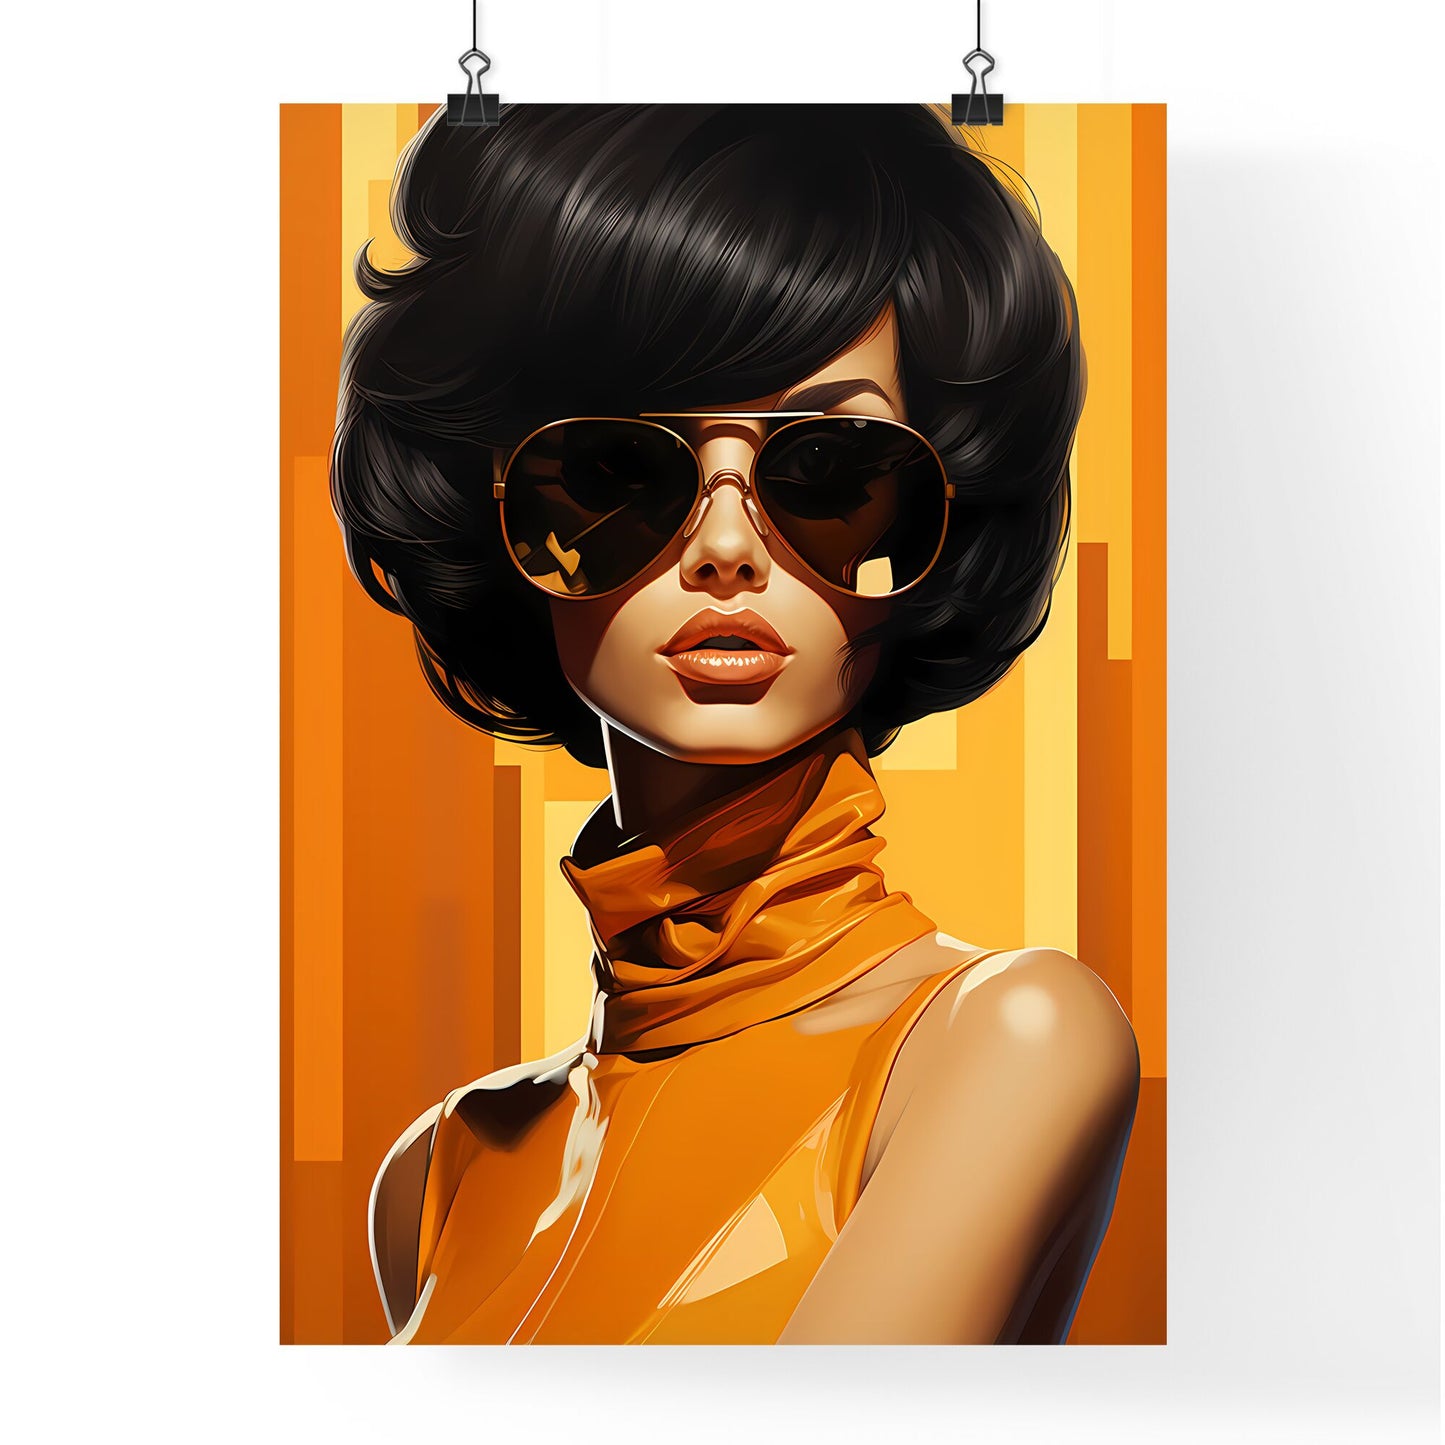 70's - A Woman With Short Black Hair Wearing Sunglasses Default Title